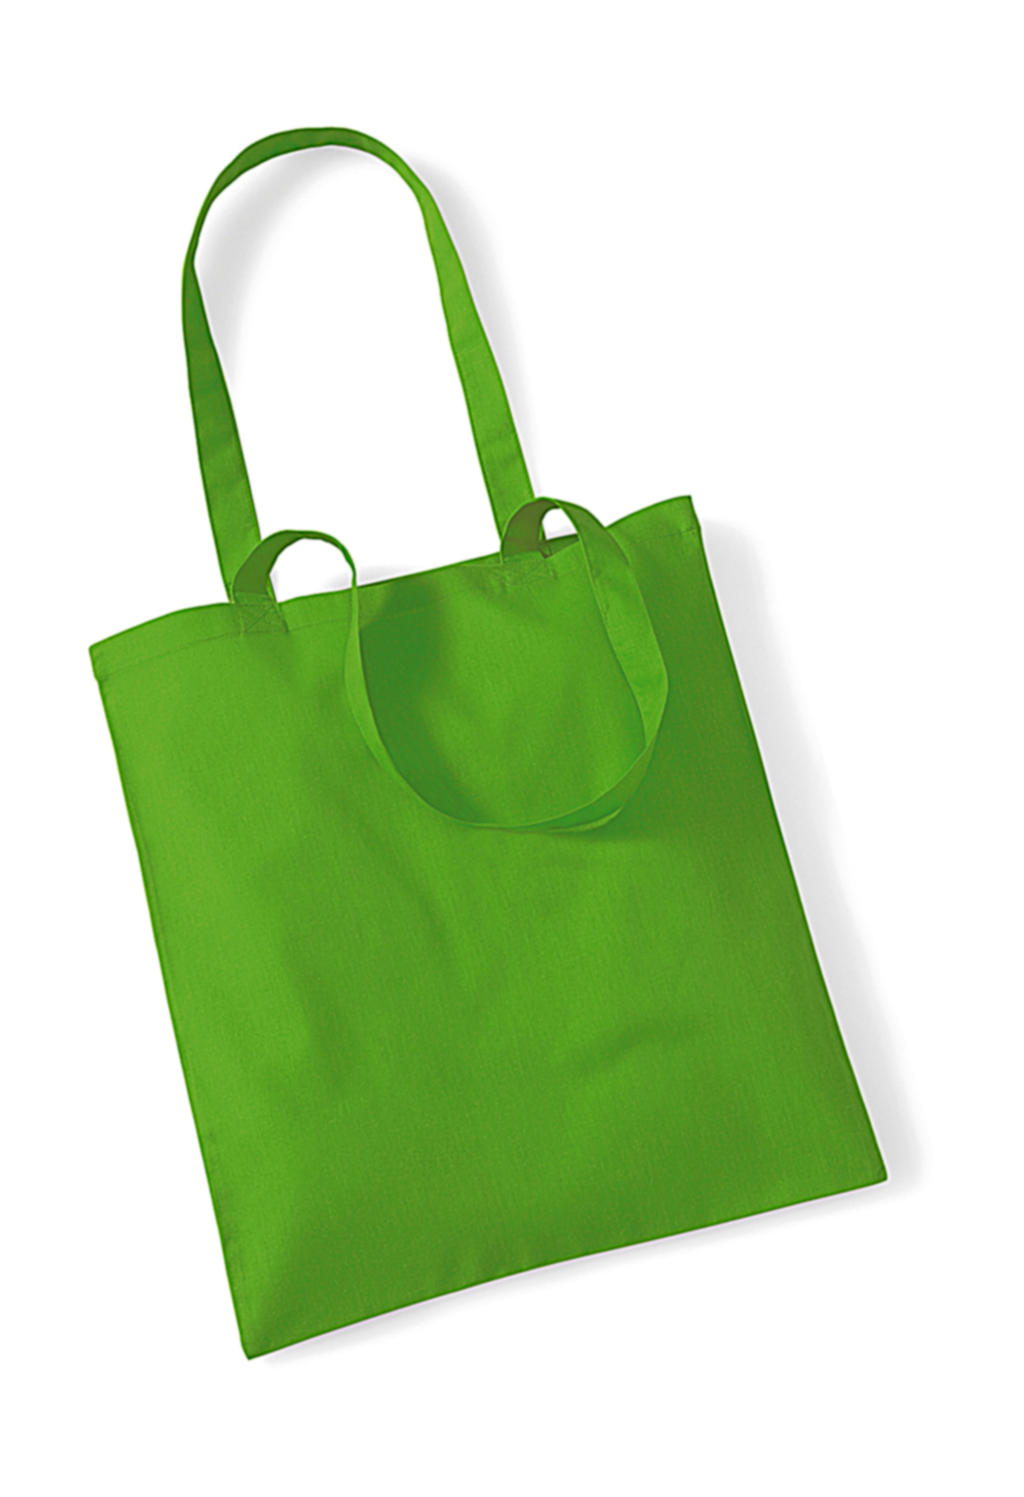  Bag for Life - Long Handles in Farbe Apple Green